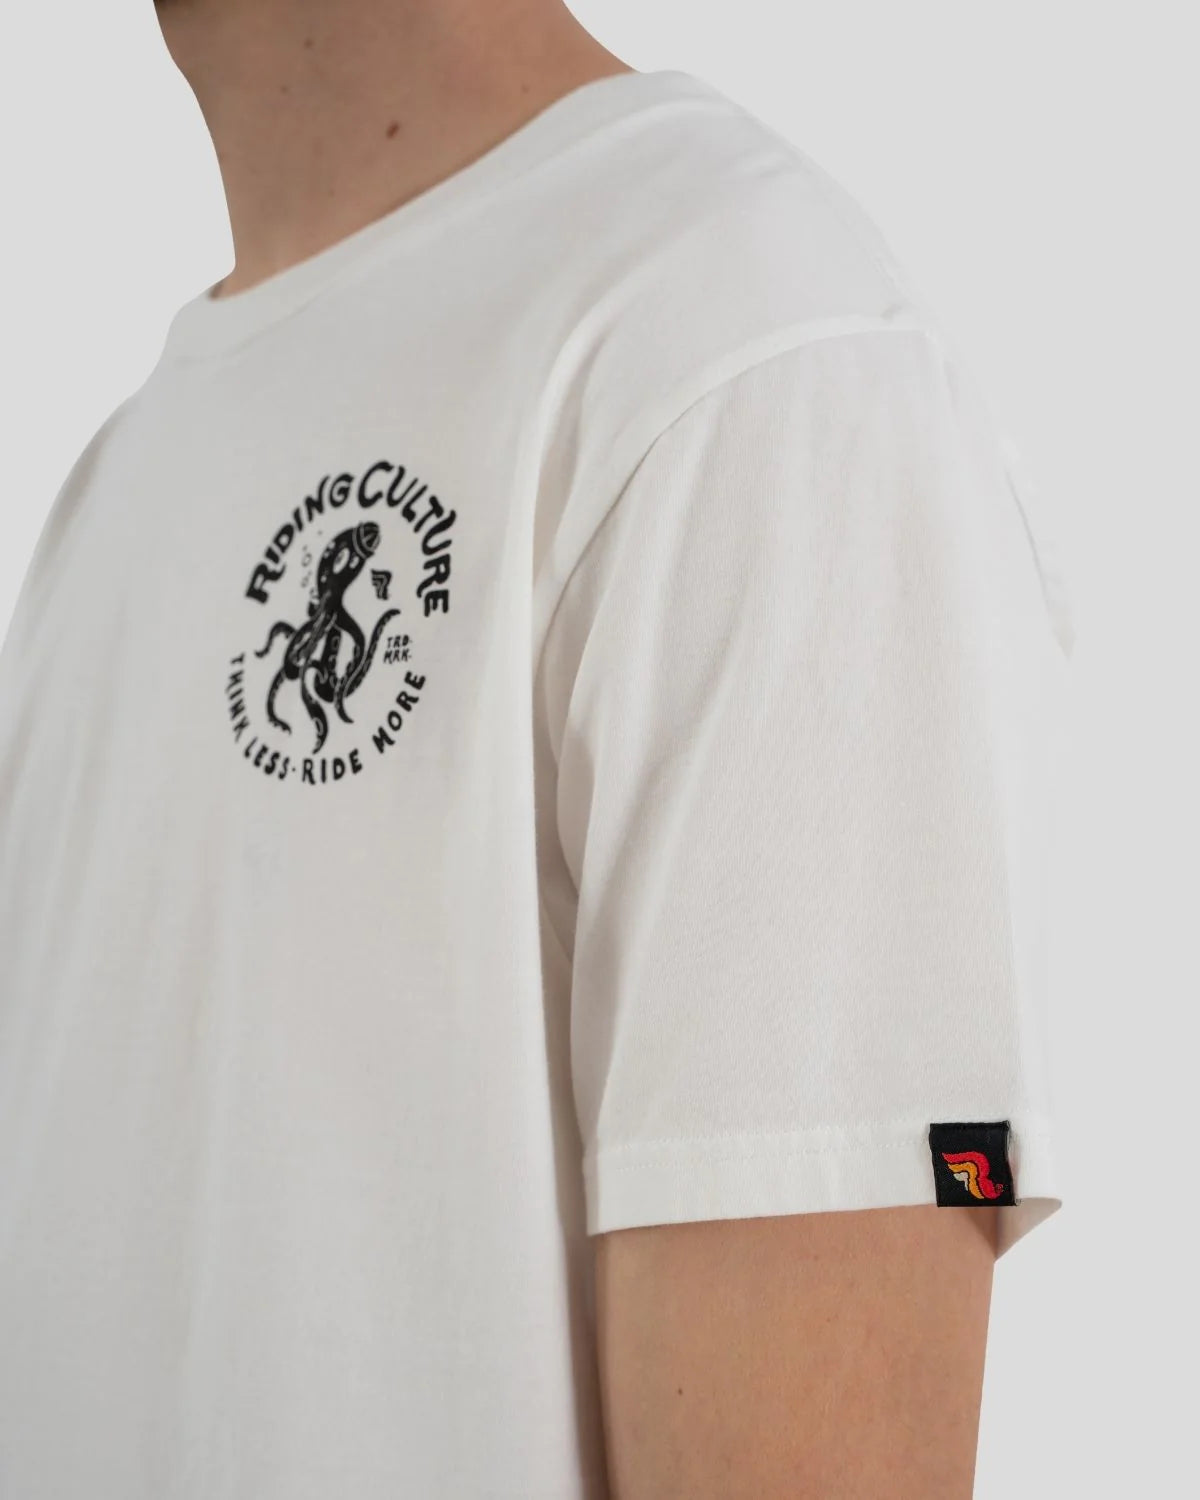 Riding Culture Octo T-Shirt - White